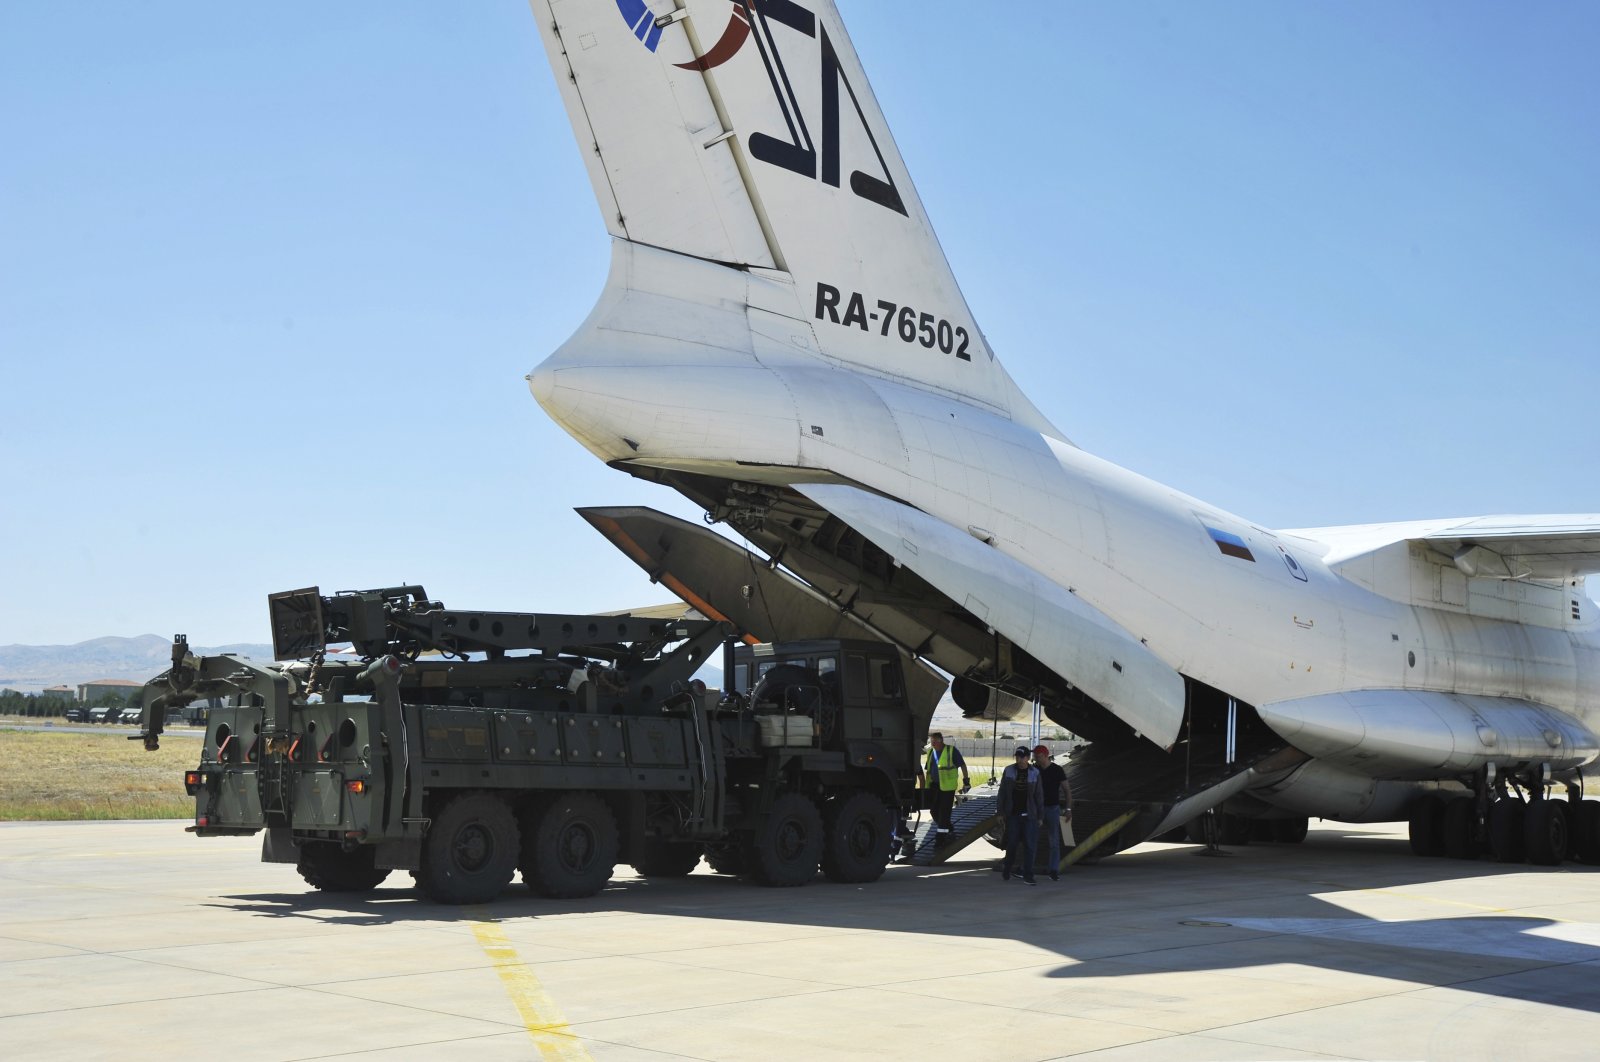 A Russian transport aircraft, carrying parts of the S-400 air defense systems, lands at Mürted military airport outside Ankara, Turkey, Aug. 27, 2019. (AP Photo)